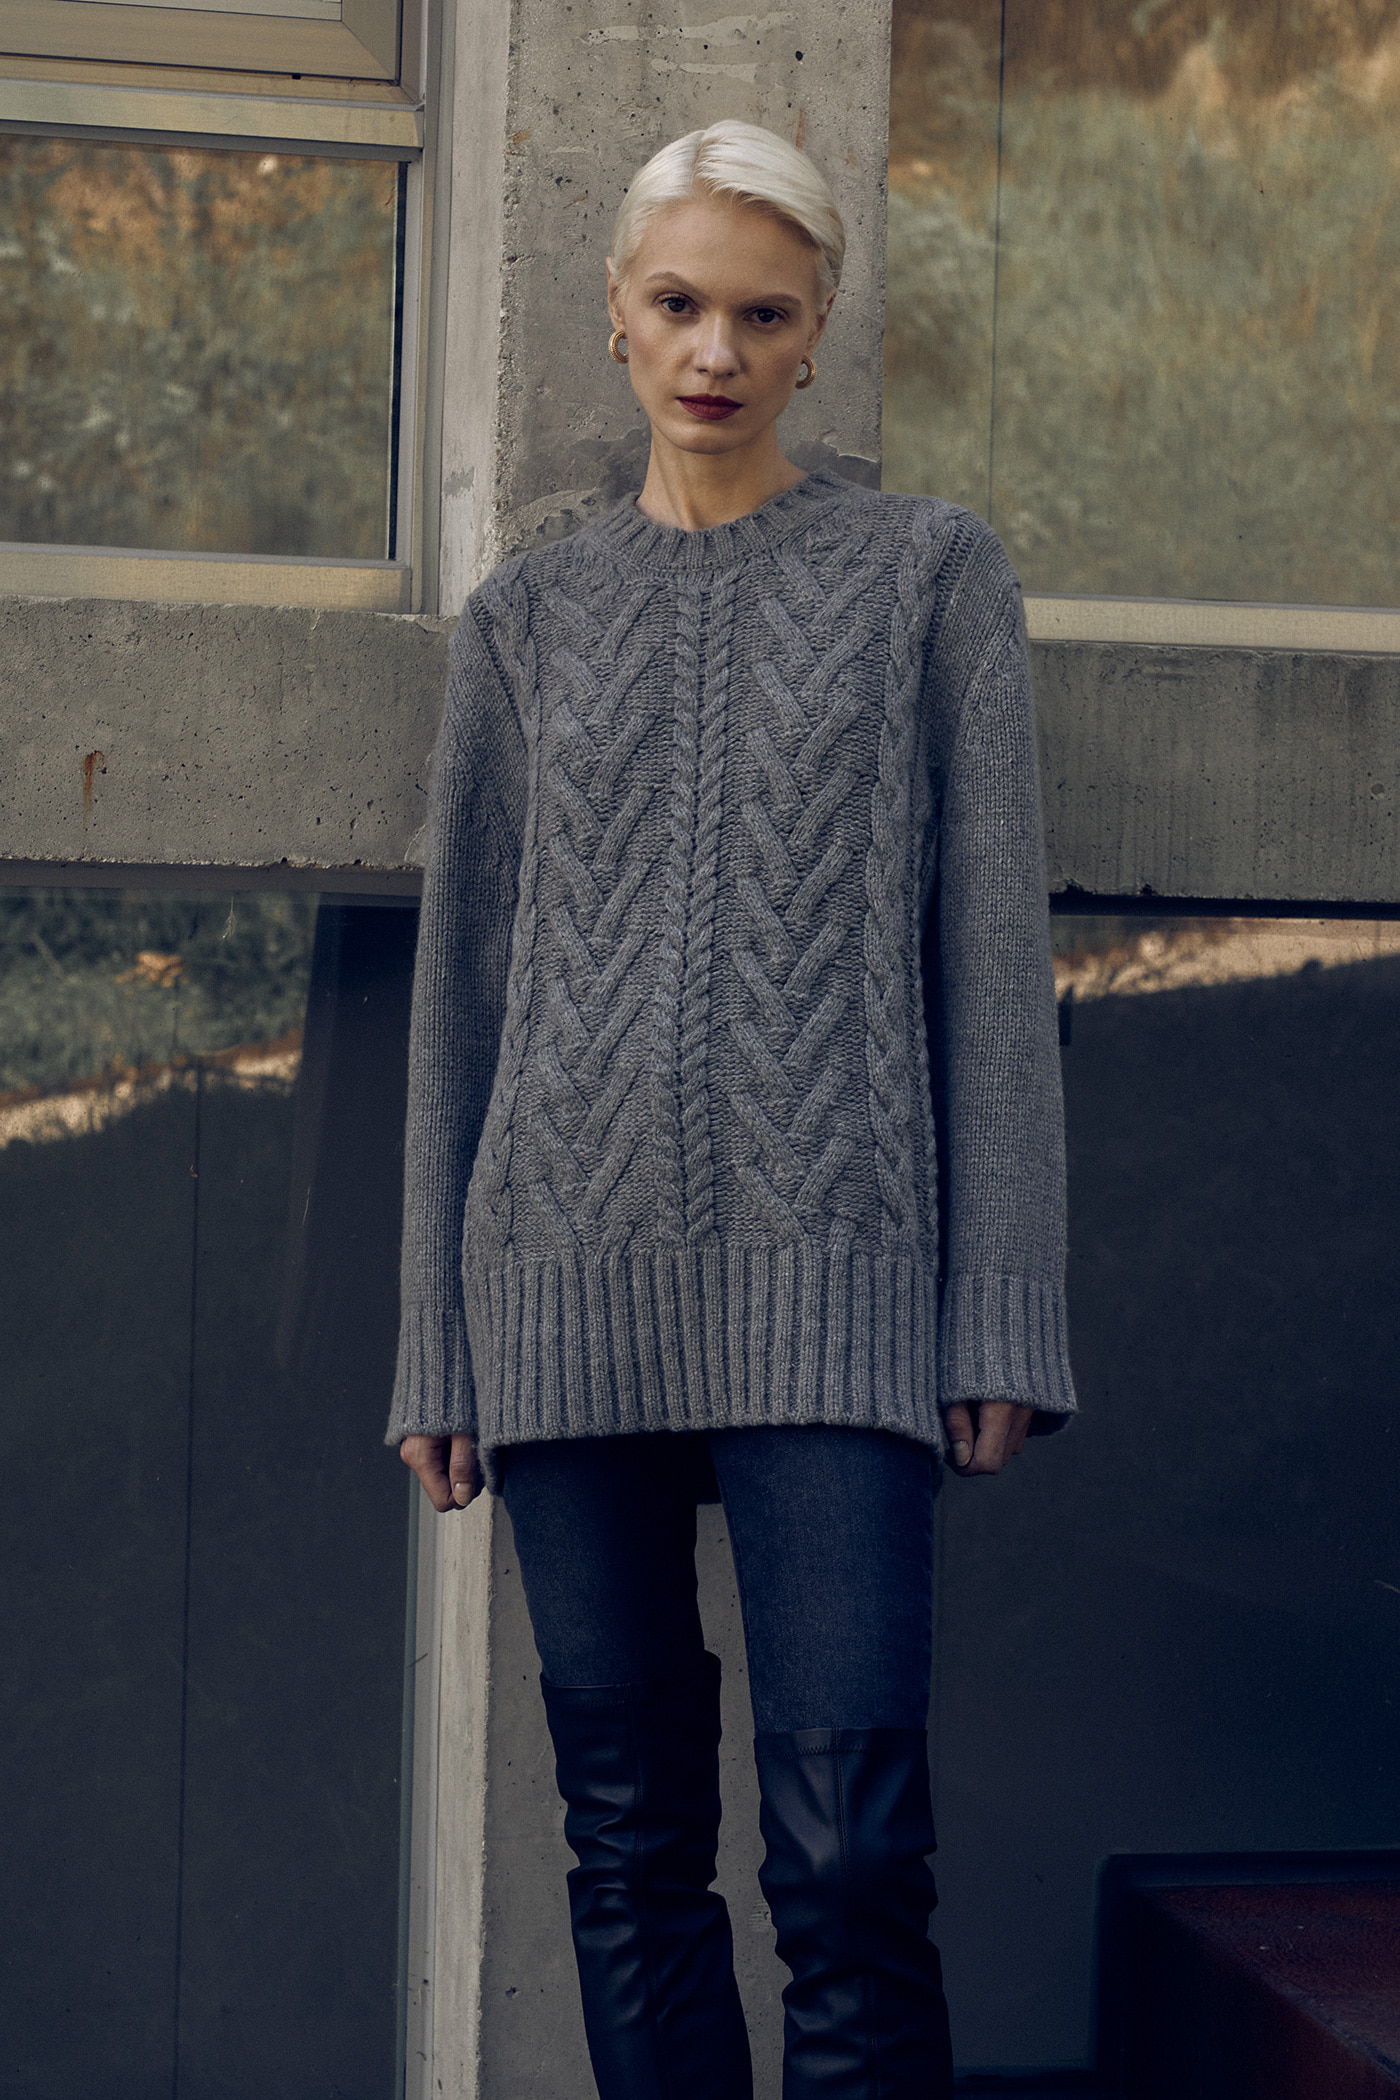 Wool Over Fit Cable Kint Top[LMBBWIKN142]-Melange Gray